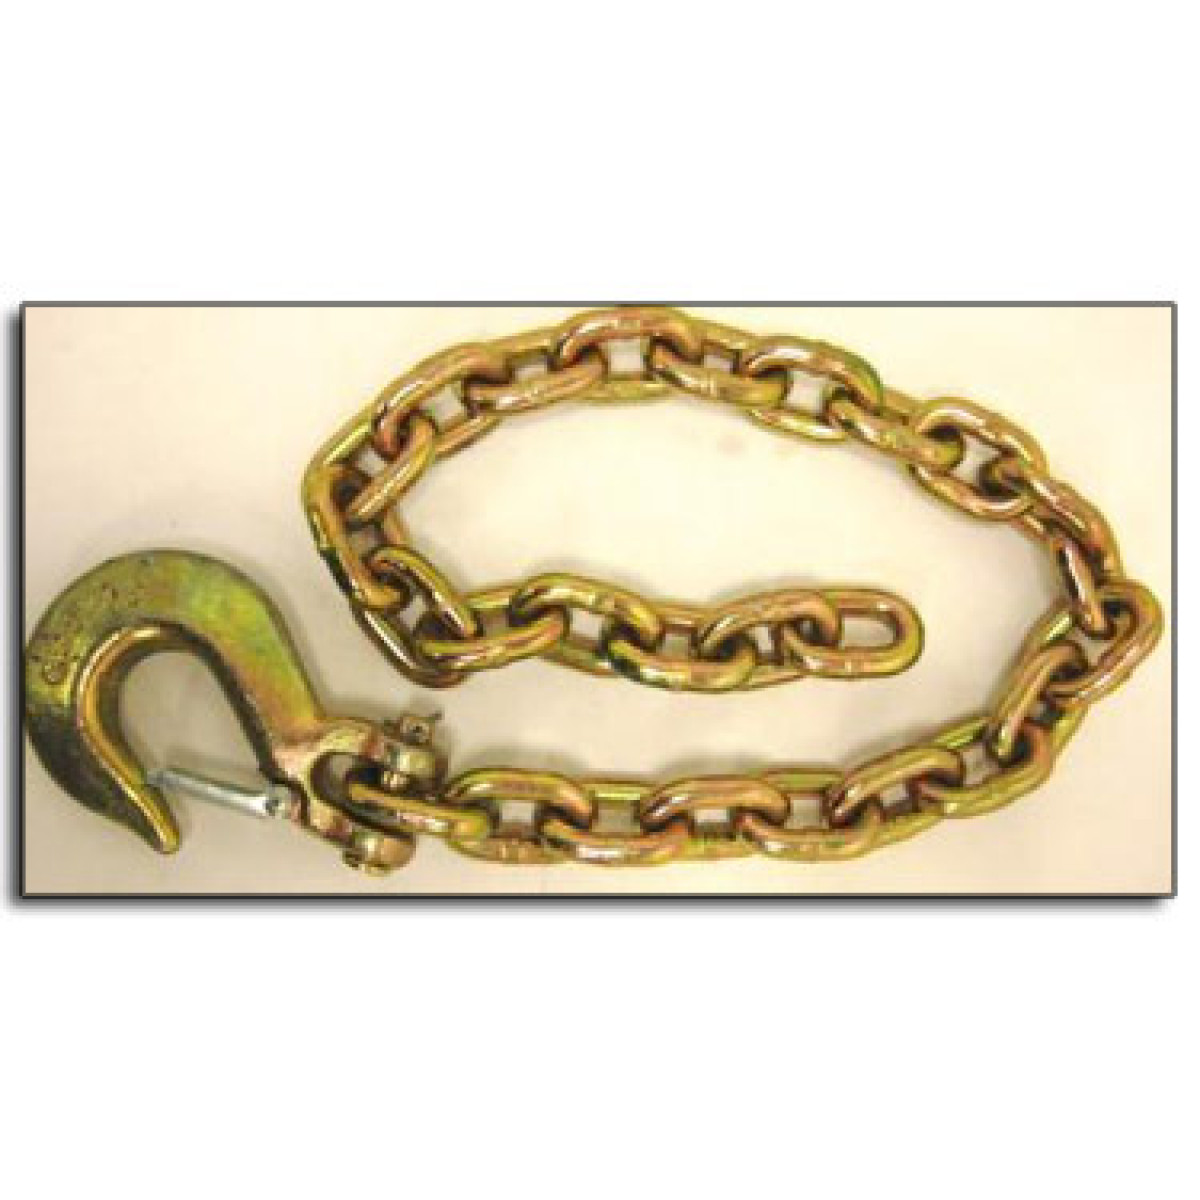 Back Hook Chain, Connector Chain, Adjustable, 5 Inches Long, Gold